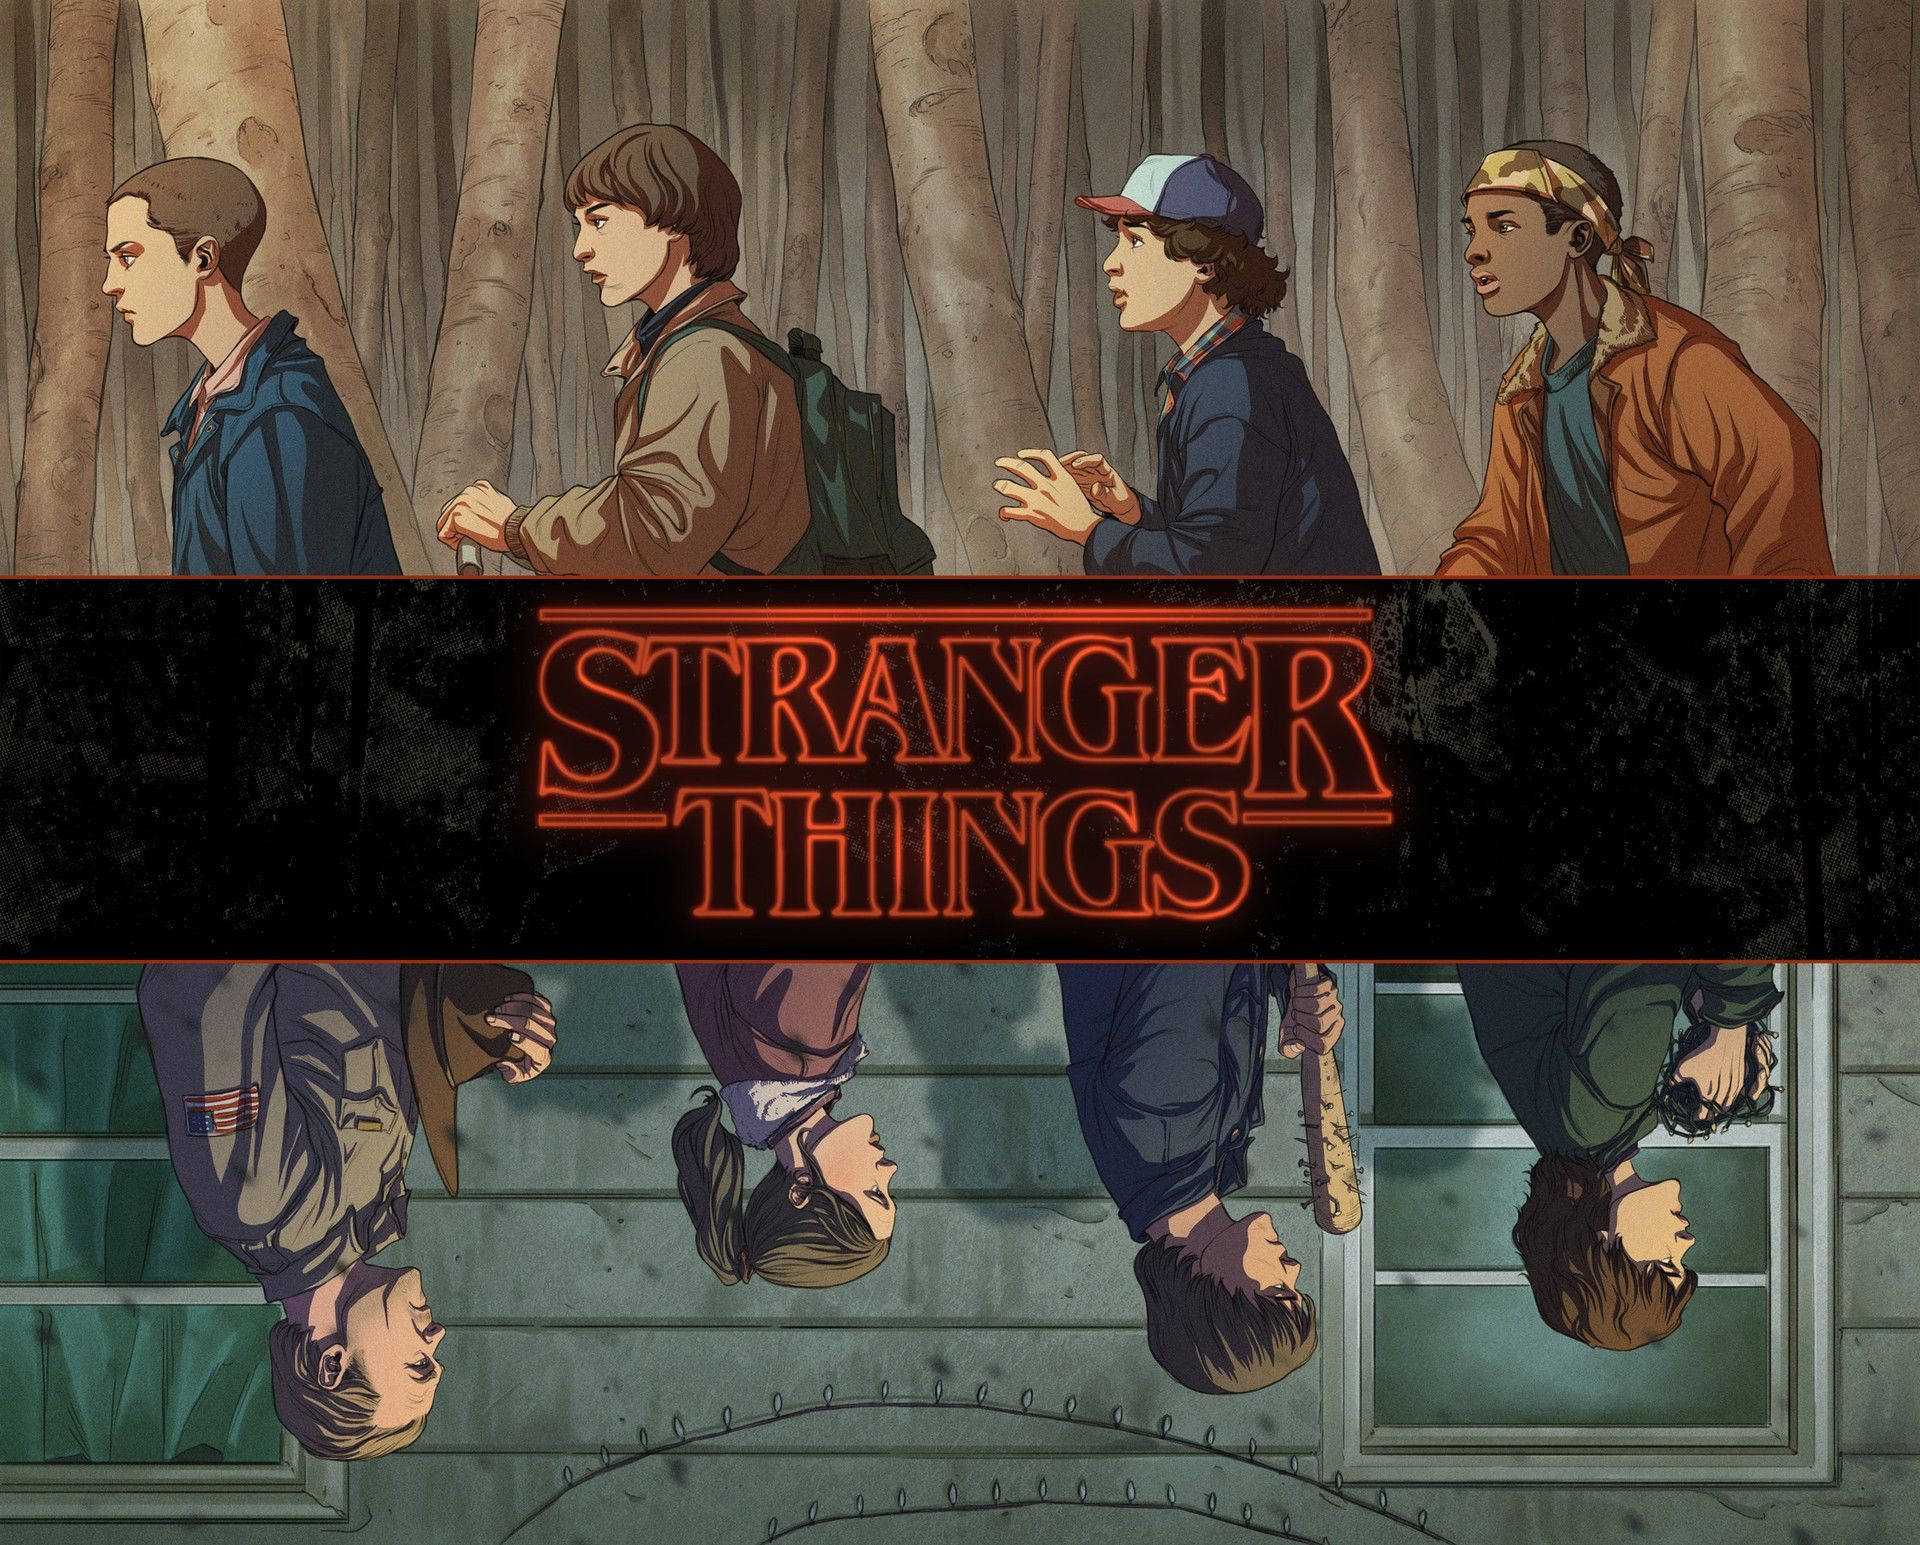 Stranger Things Upside Down Free Wallpaper download  Download Free Stranger  Things Upside Down HD Wallpapers to your mobile phone or tablet